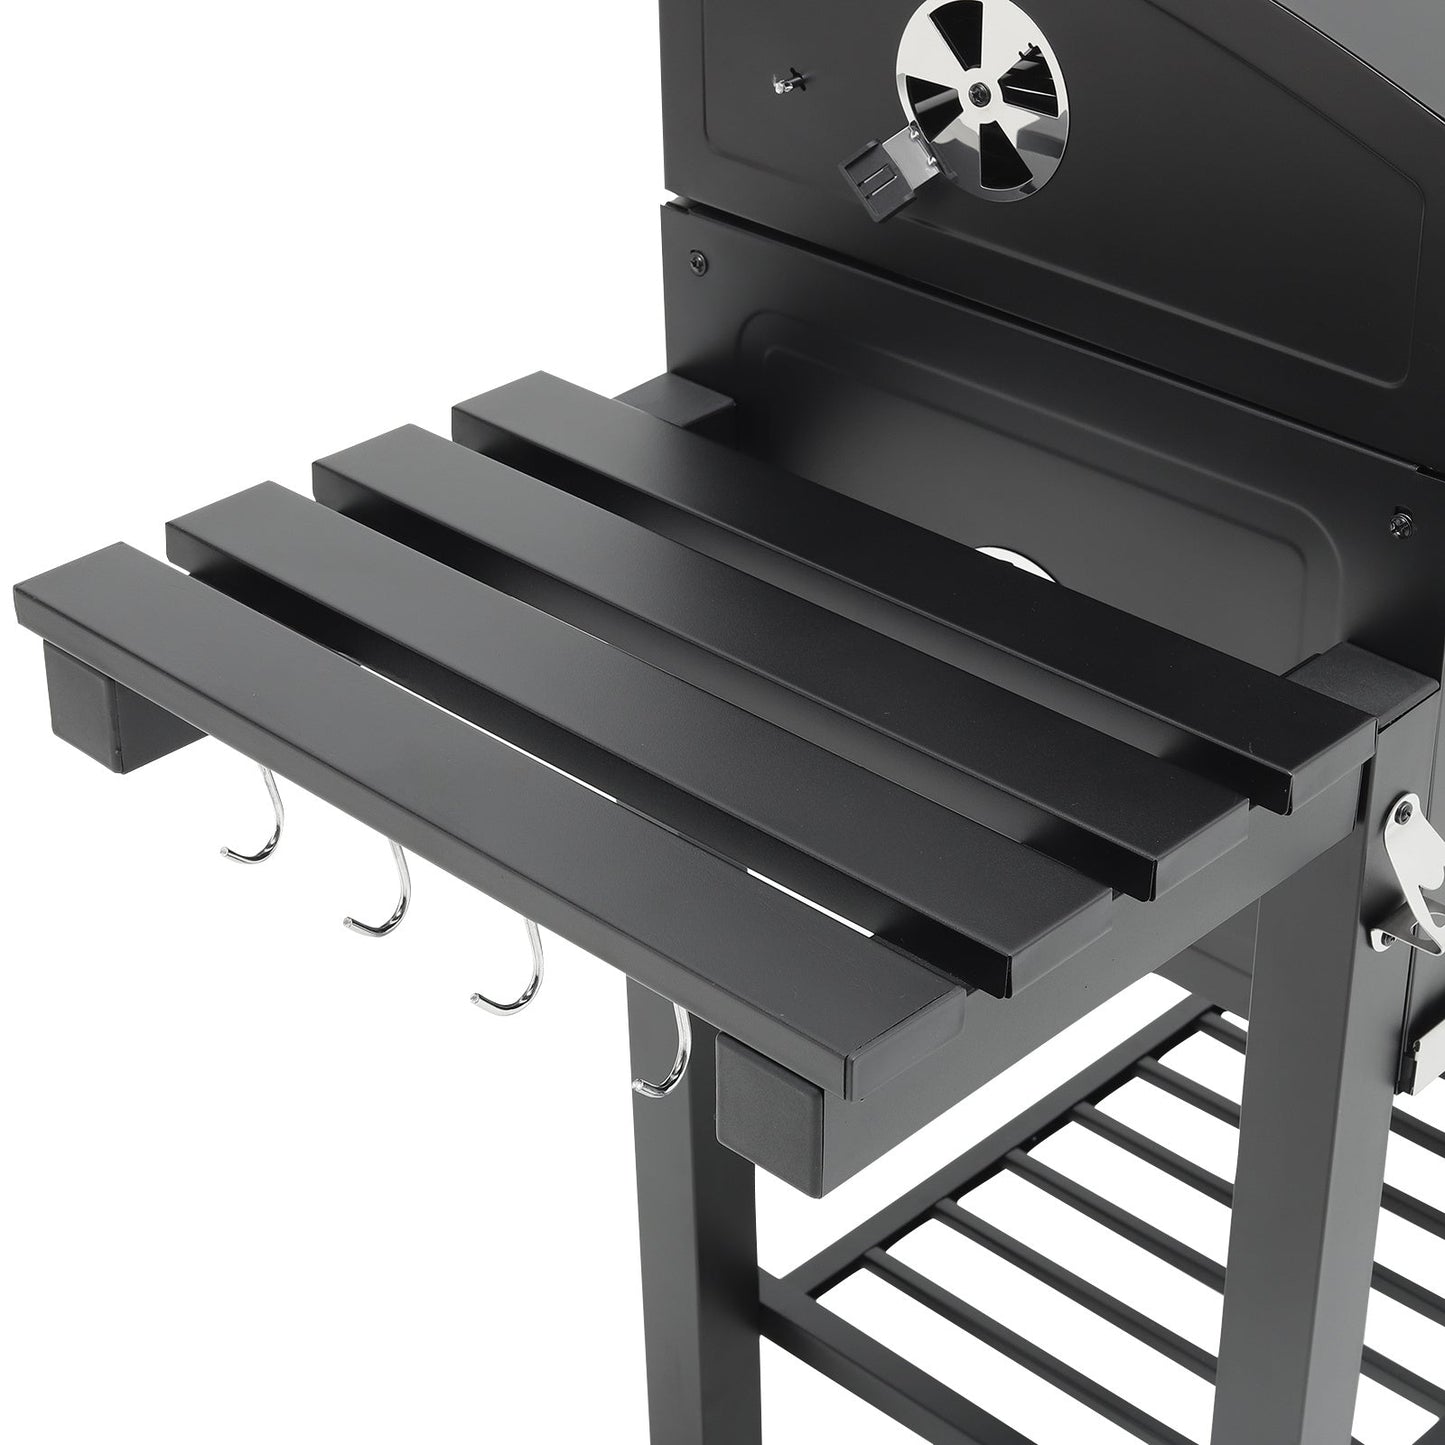 Barrel Charcoal Grill Wide 160cm with Side Shelves Garden BBQ Grill   